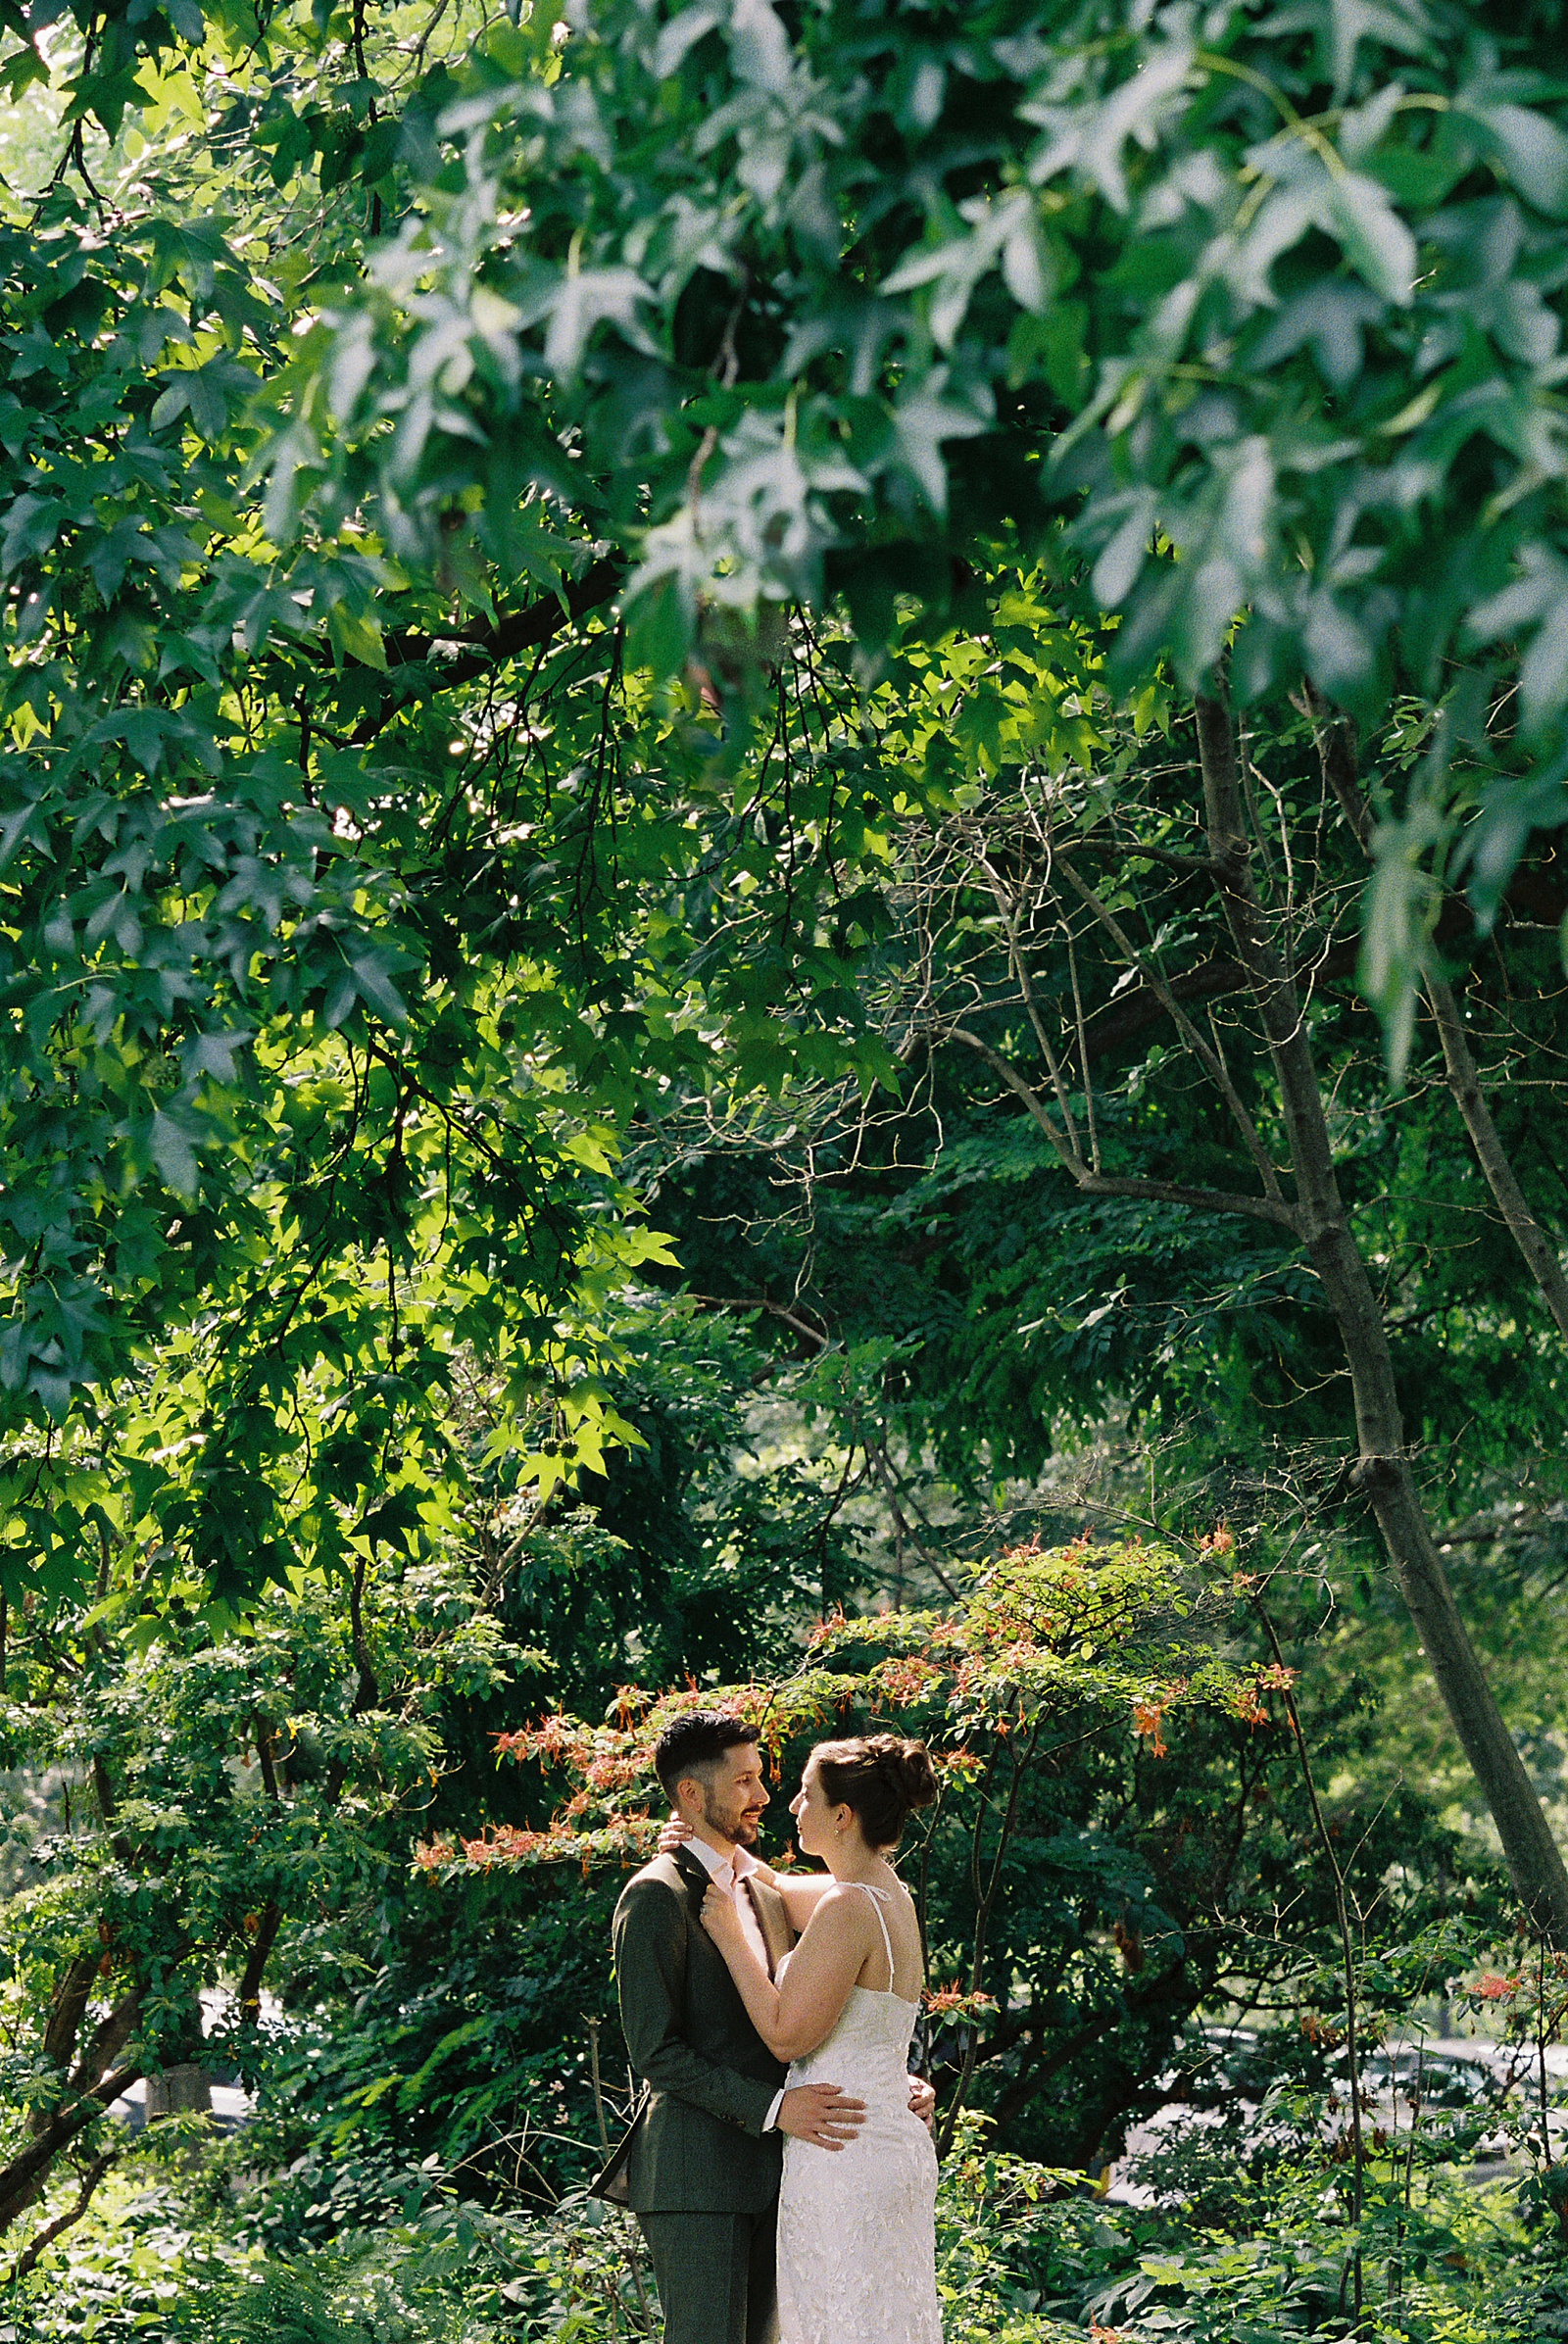 A Philadelphia bride and groom cuddle in a garden after their elopement at Fairmount Park.